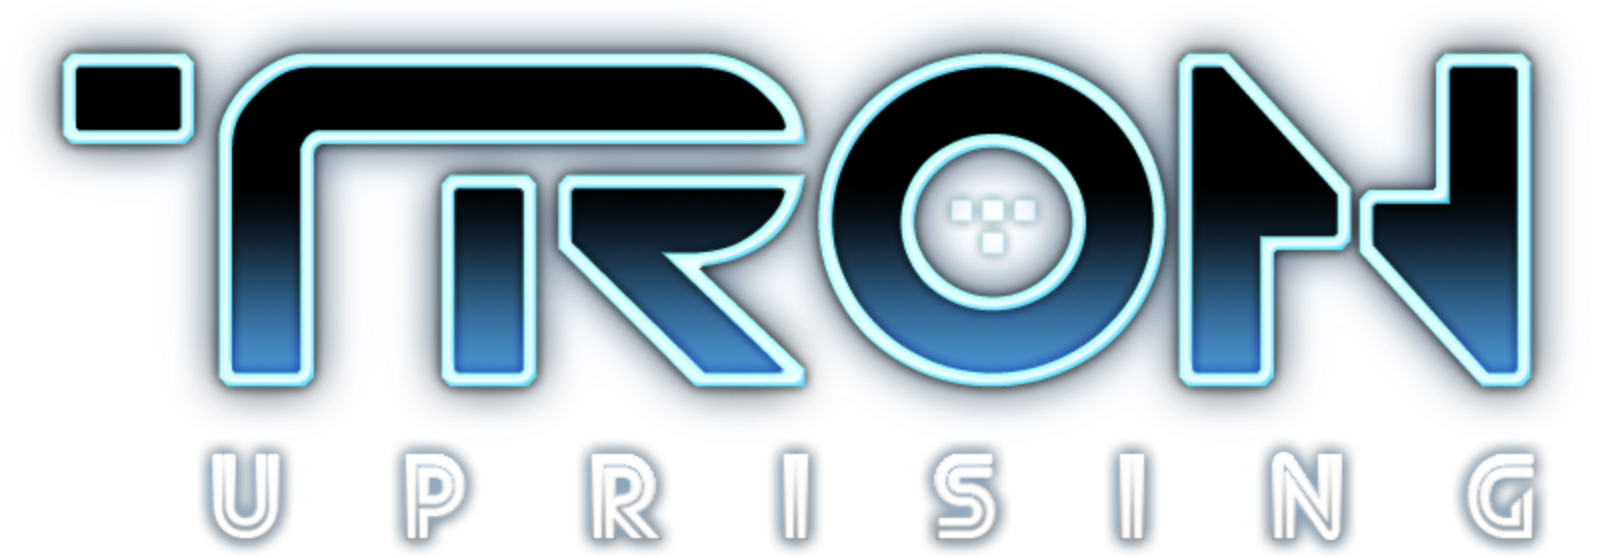 Tron: Uprising Complete 